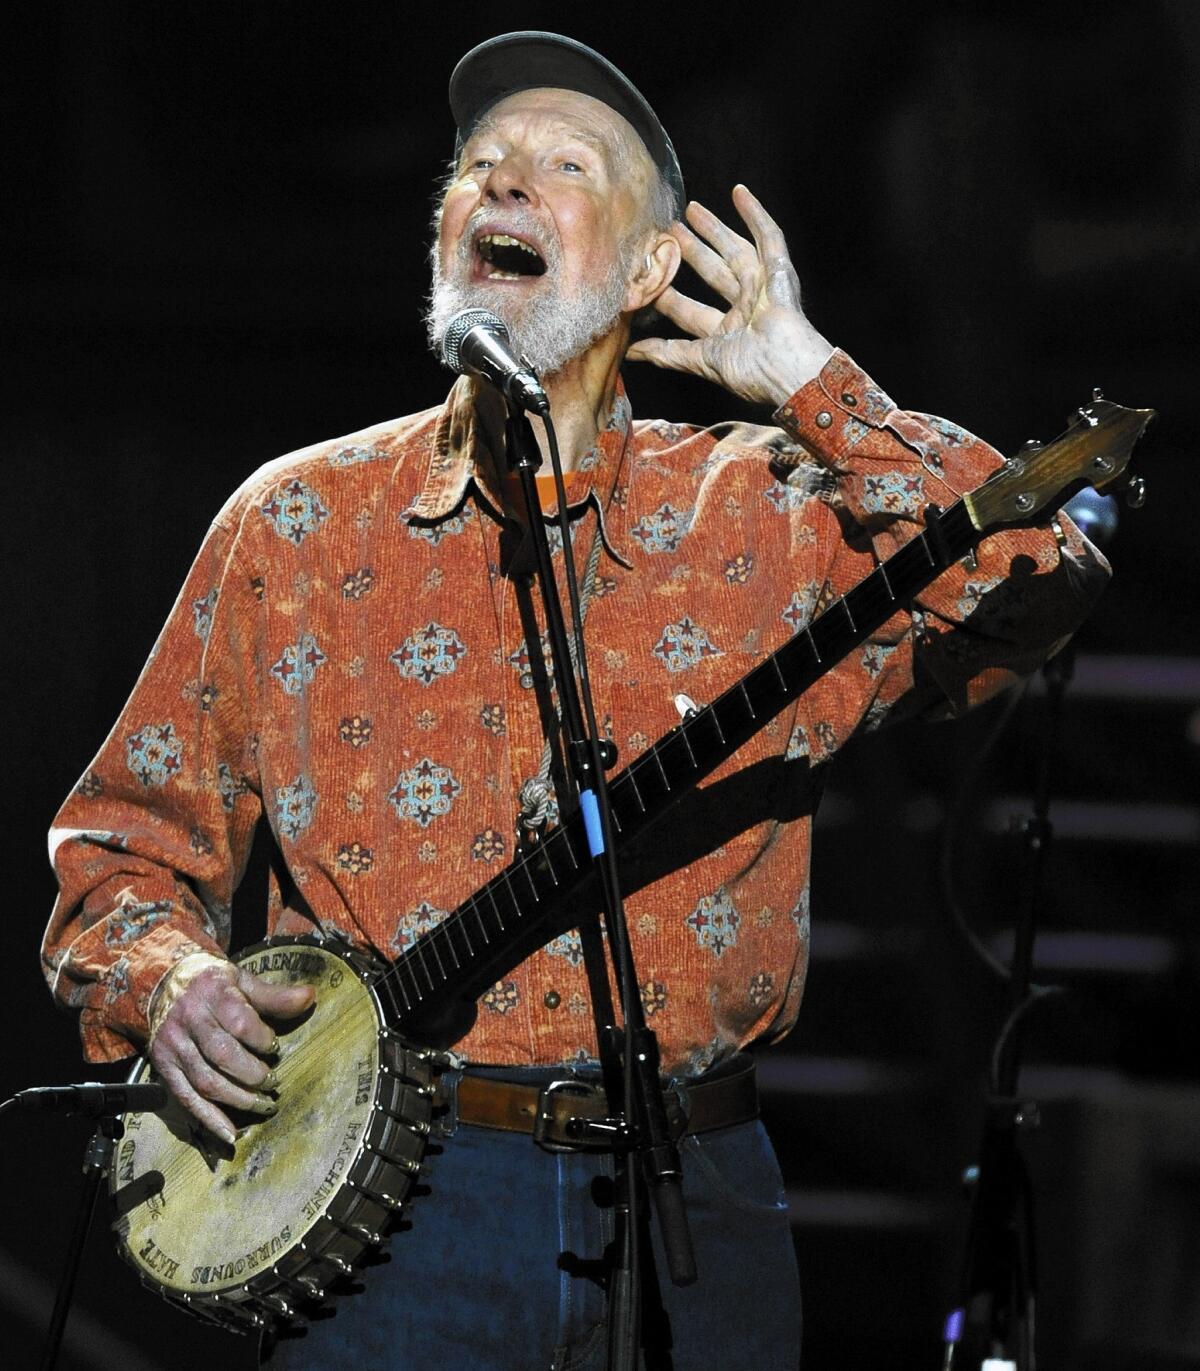 Folk music legend Pete Seeger performs during a concert marking his 90th birthday at Madison Square Garden in New York in 2009. Seeger died this week died at the age of 94.